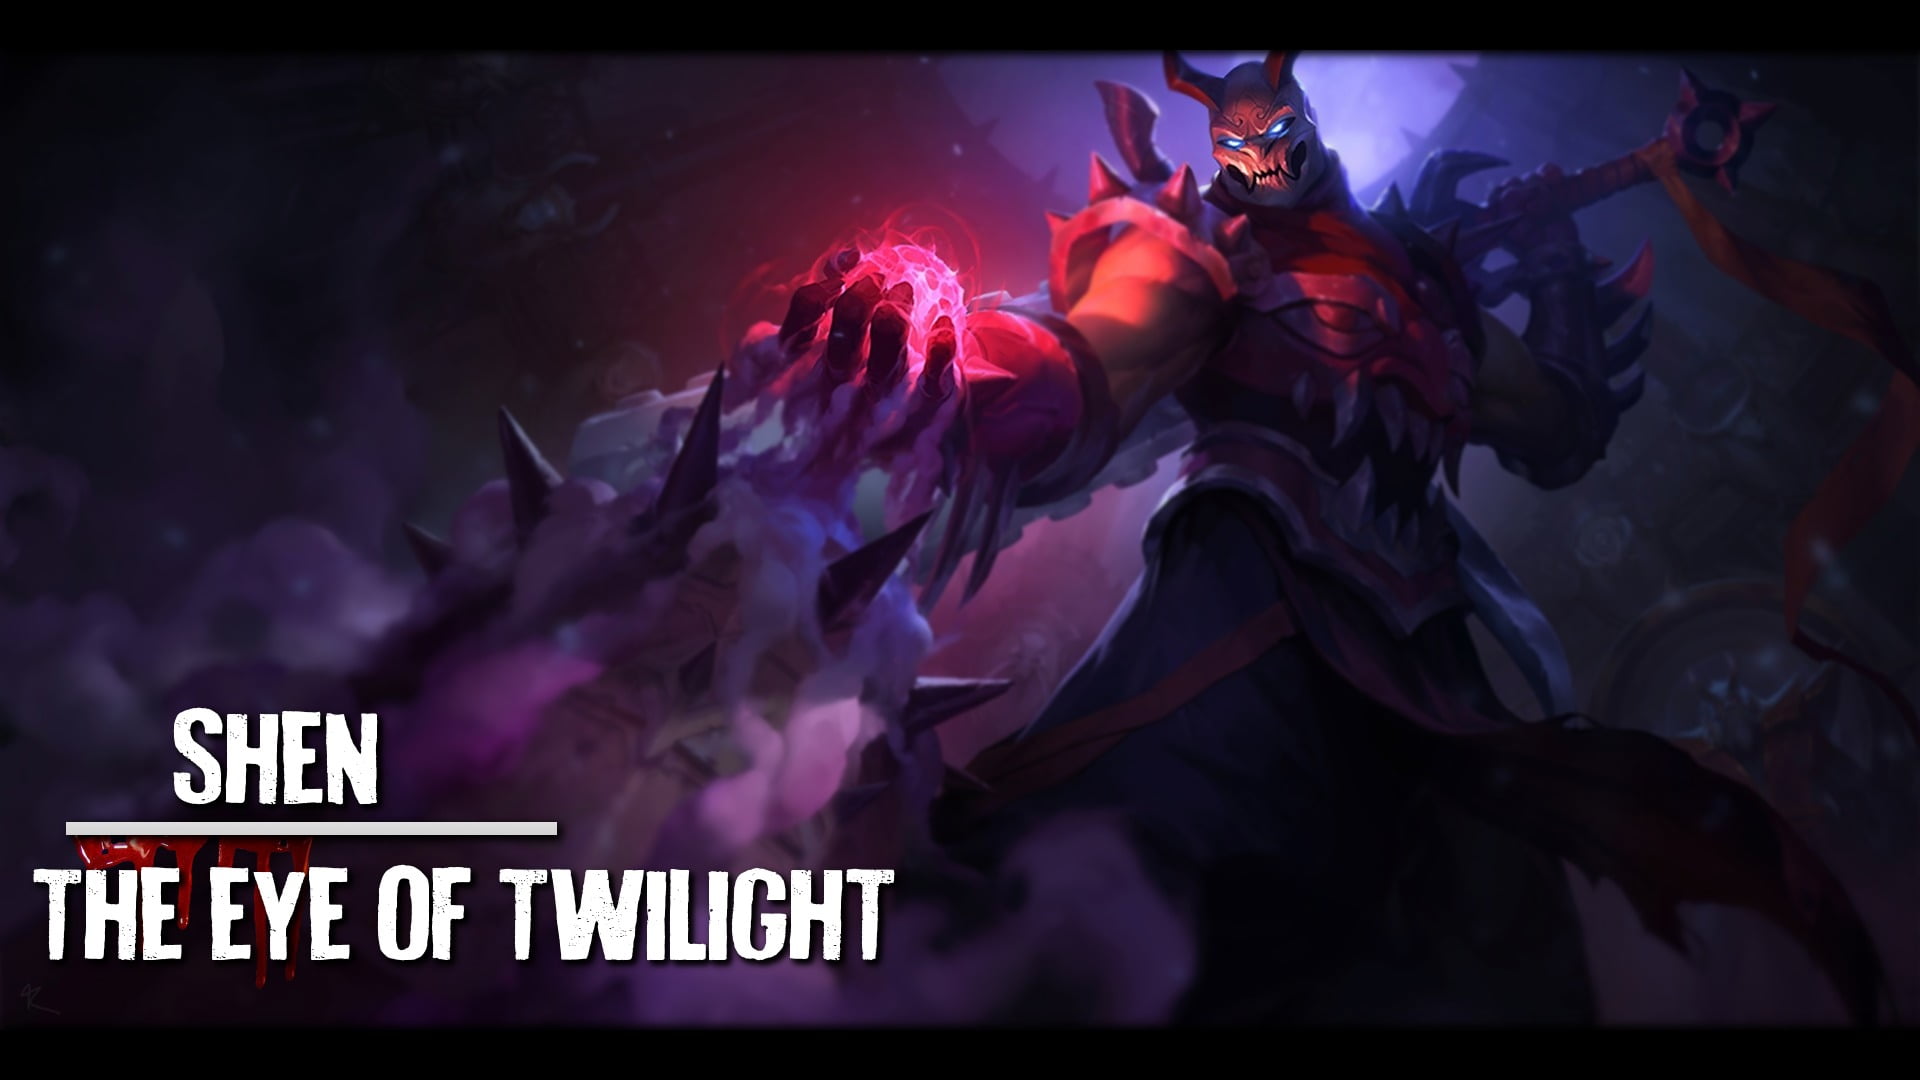 Shen The Eye of Twilight League of Legends illustration with text overlay